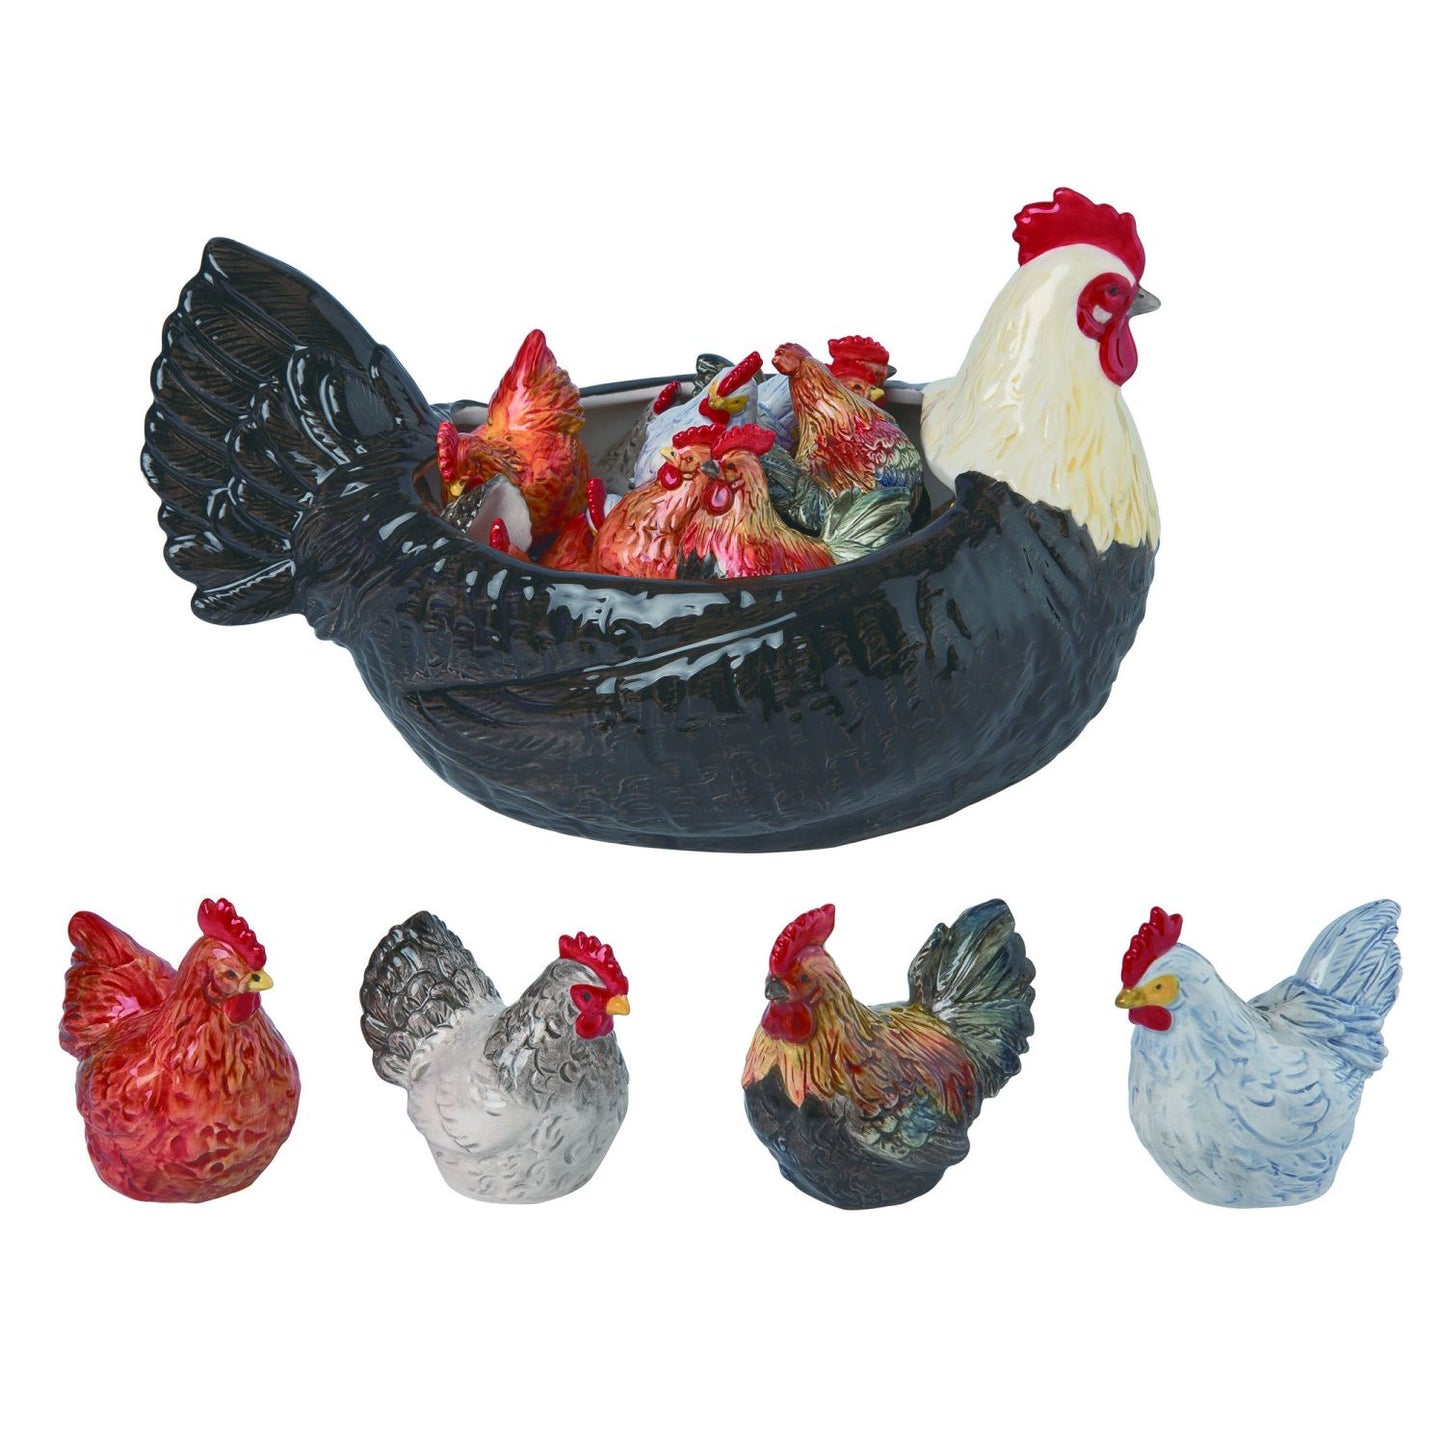 Transpac Dolomite Chicken Salt & Pepper Shakers With Bowl Display, Set Of 17